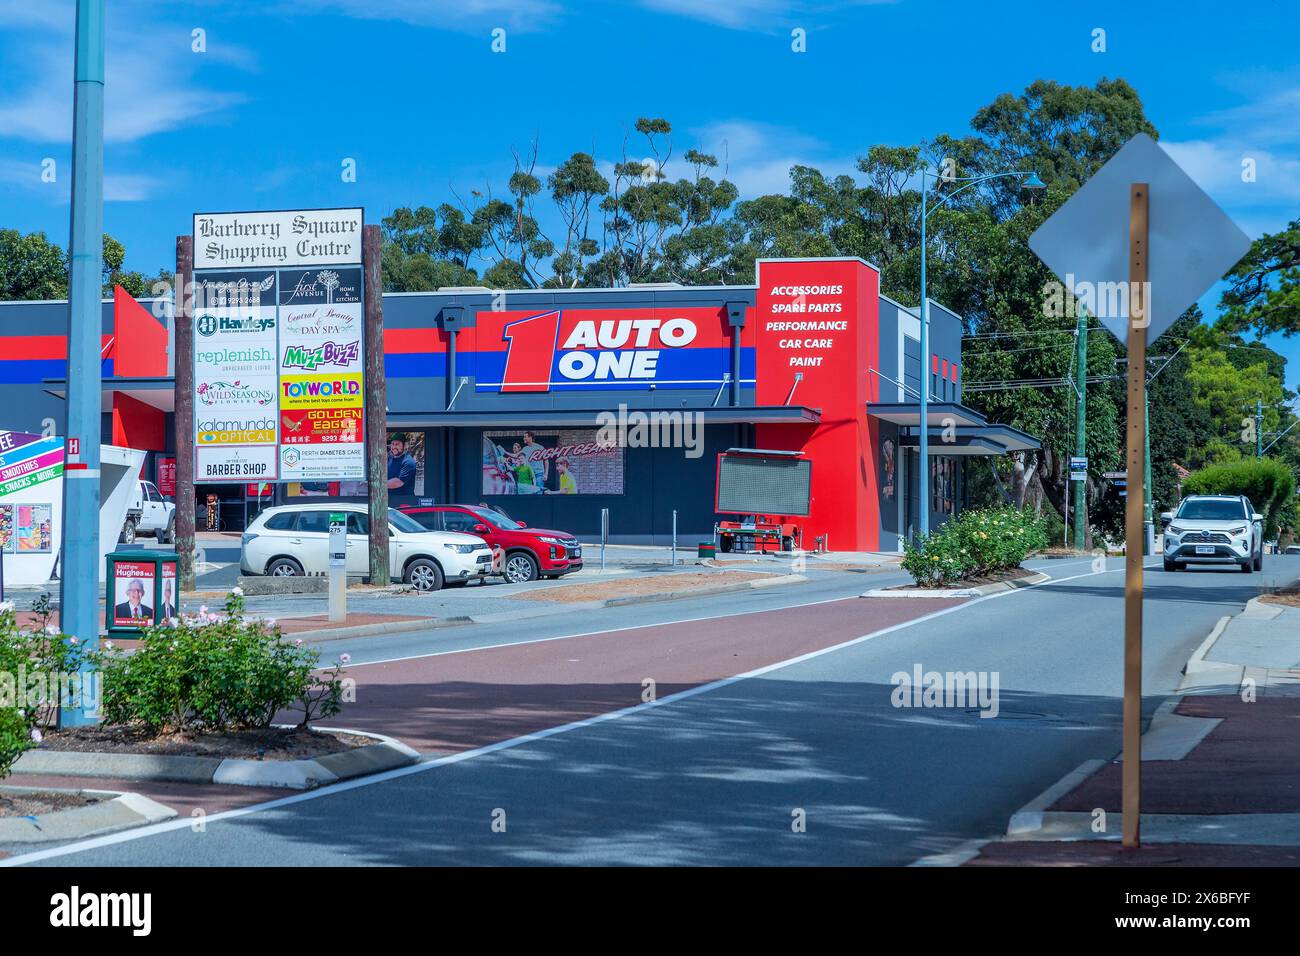 Auto One garage on the Canning road coming into Kalamunda a town and eastern suburb of Perth, Western Australia,. Stock Photo